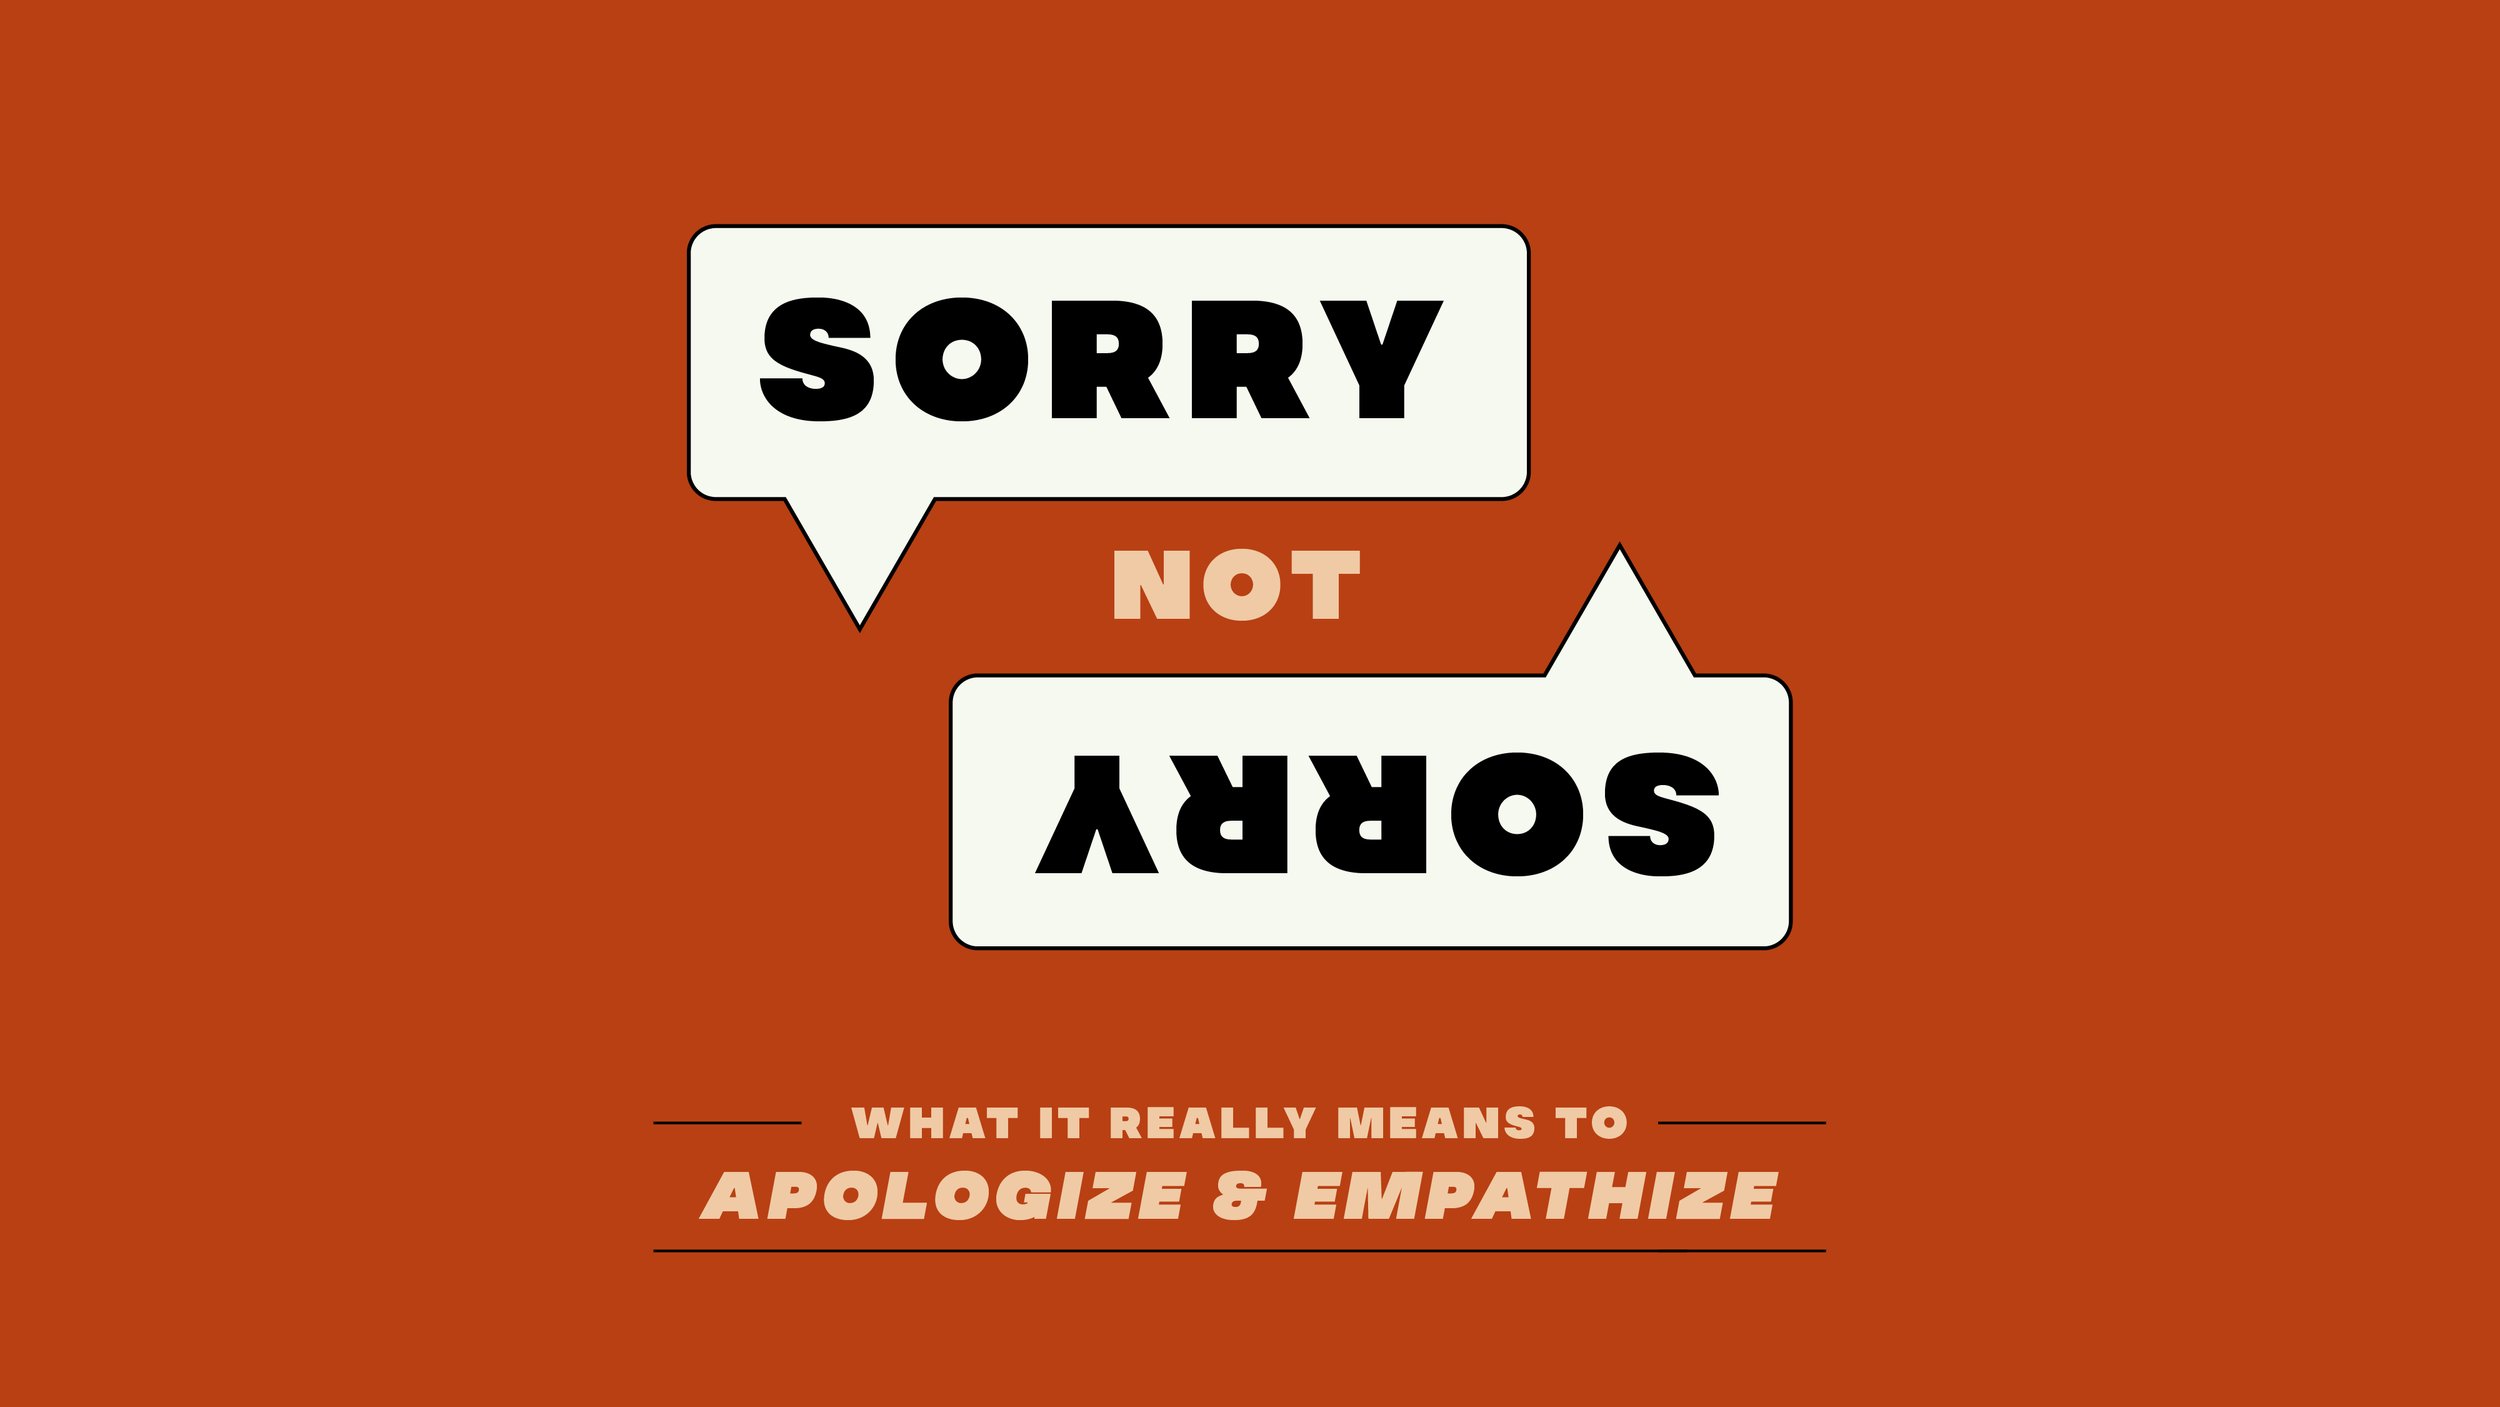 Sorry, Not Sorry: What it Really Means to Apologize